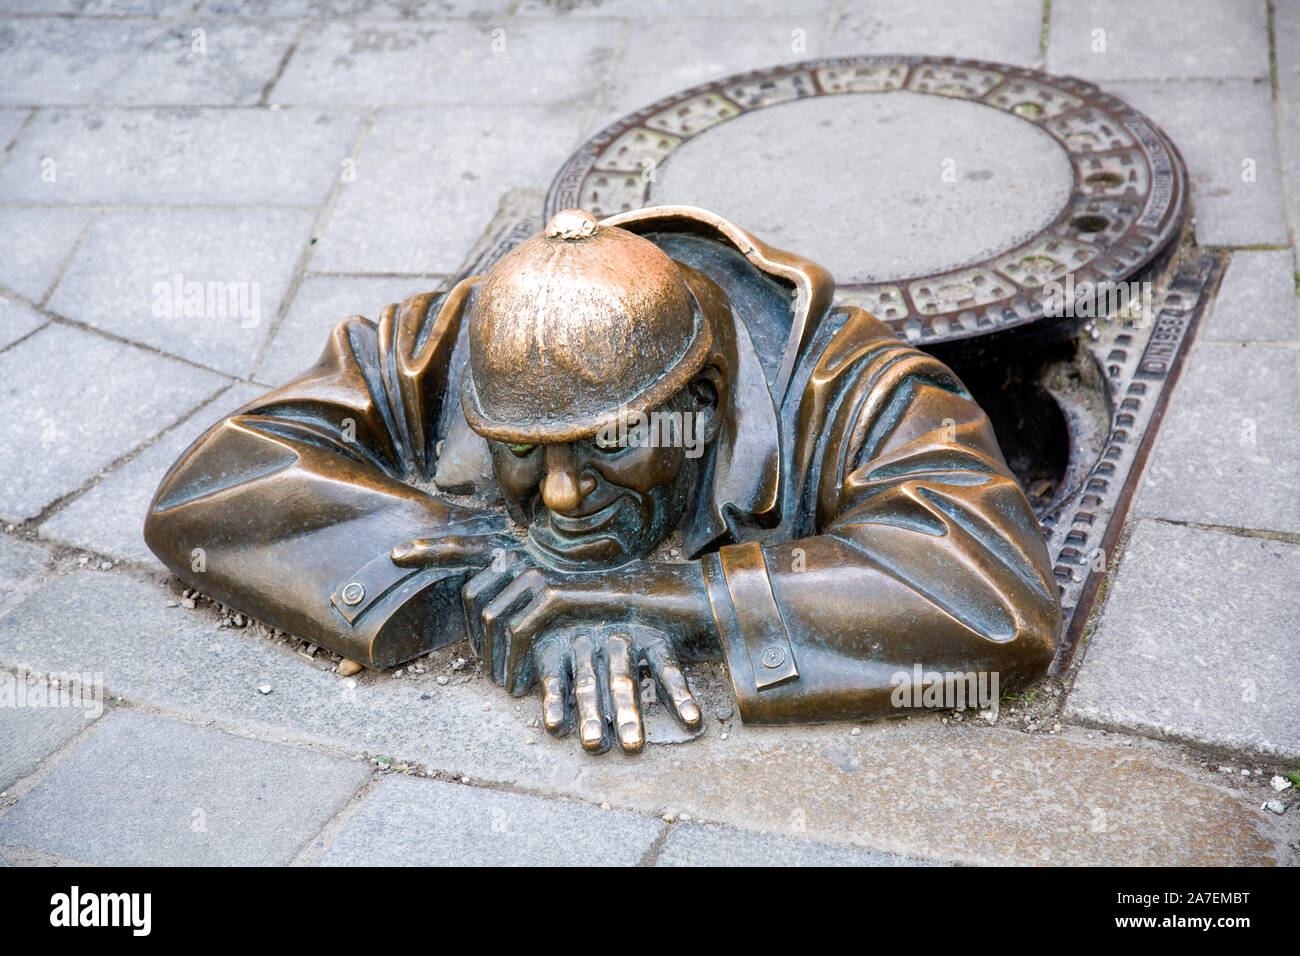 Street art in the form of a bronze statue called The Watcher who appears out of an imaginary manhole in Bratislava Slovakia Stock Photo